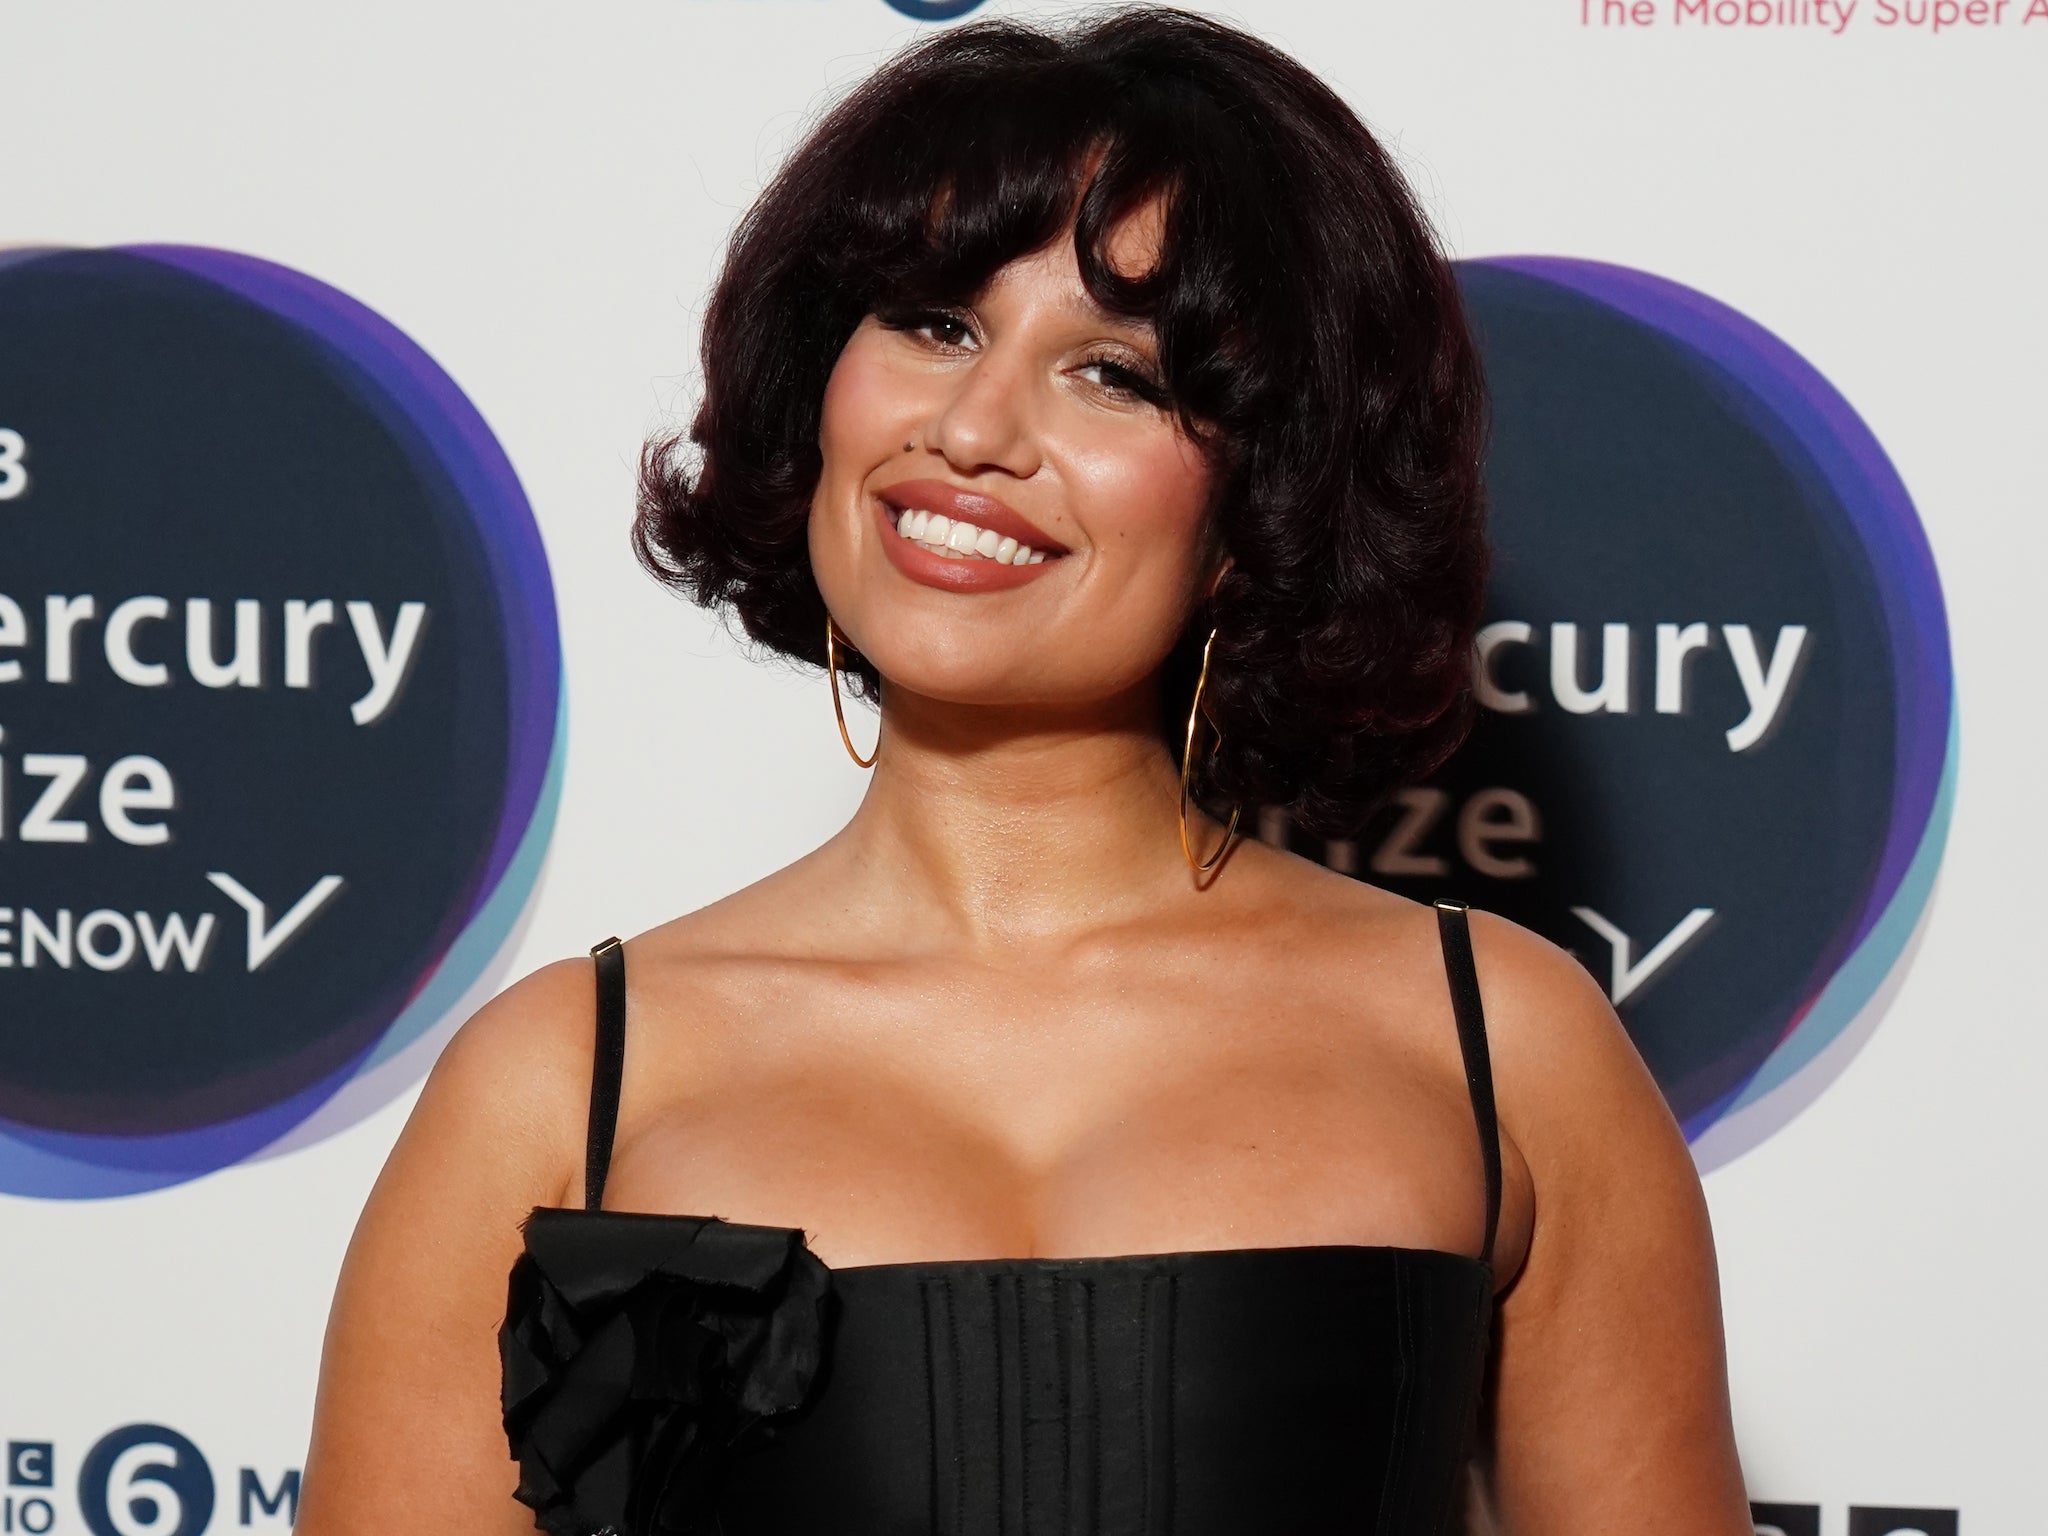 Fellow first-time nominee RAYE was seen grinning in the audience as Ezra Collective accepted their award